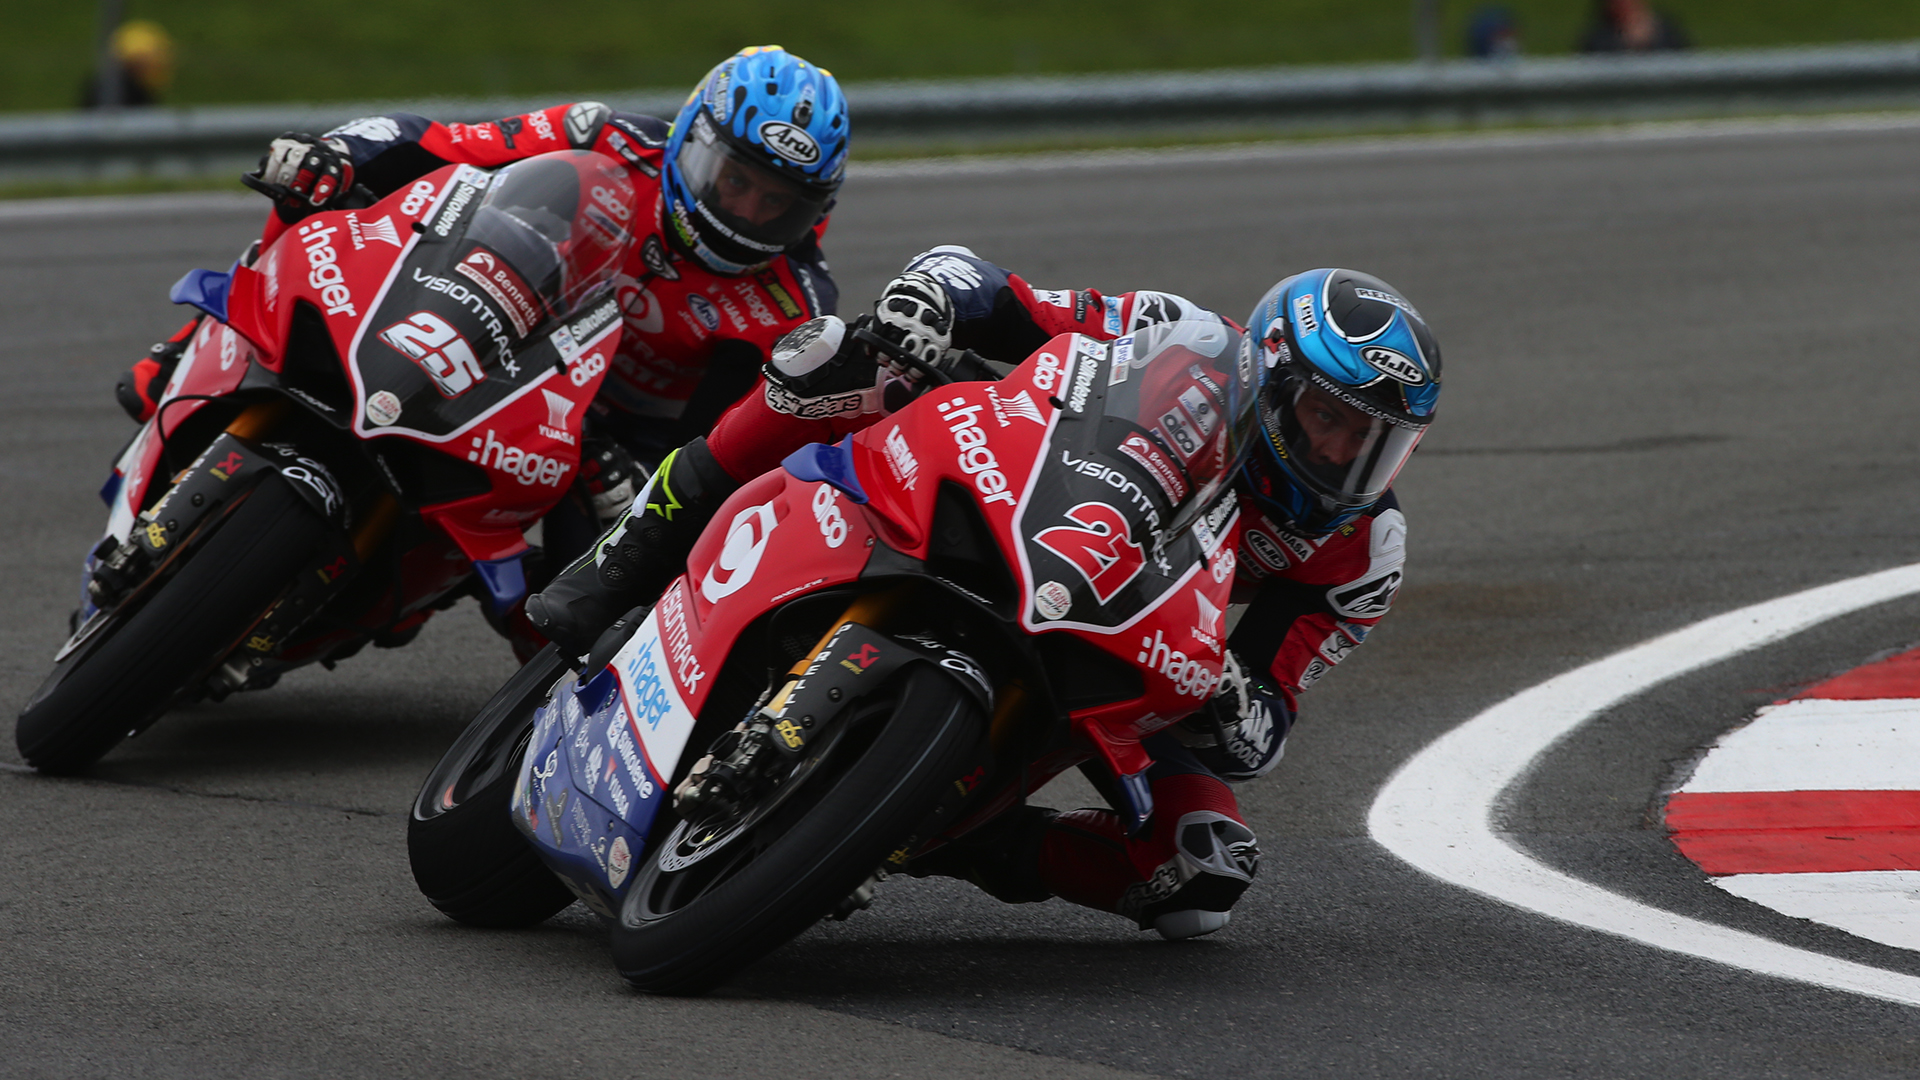 Double Podium For The Visiontrack Ducati Team In Race 1 At Donington Park As Christian Iddon And 1773